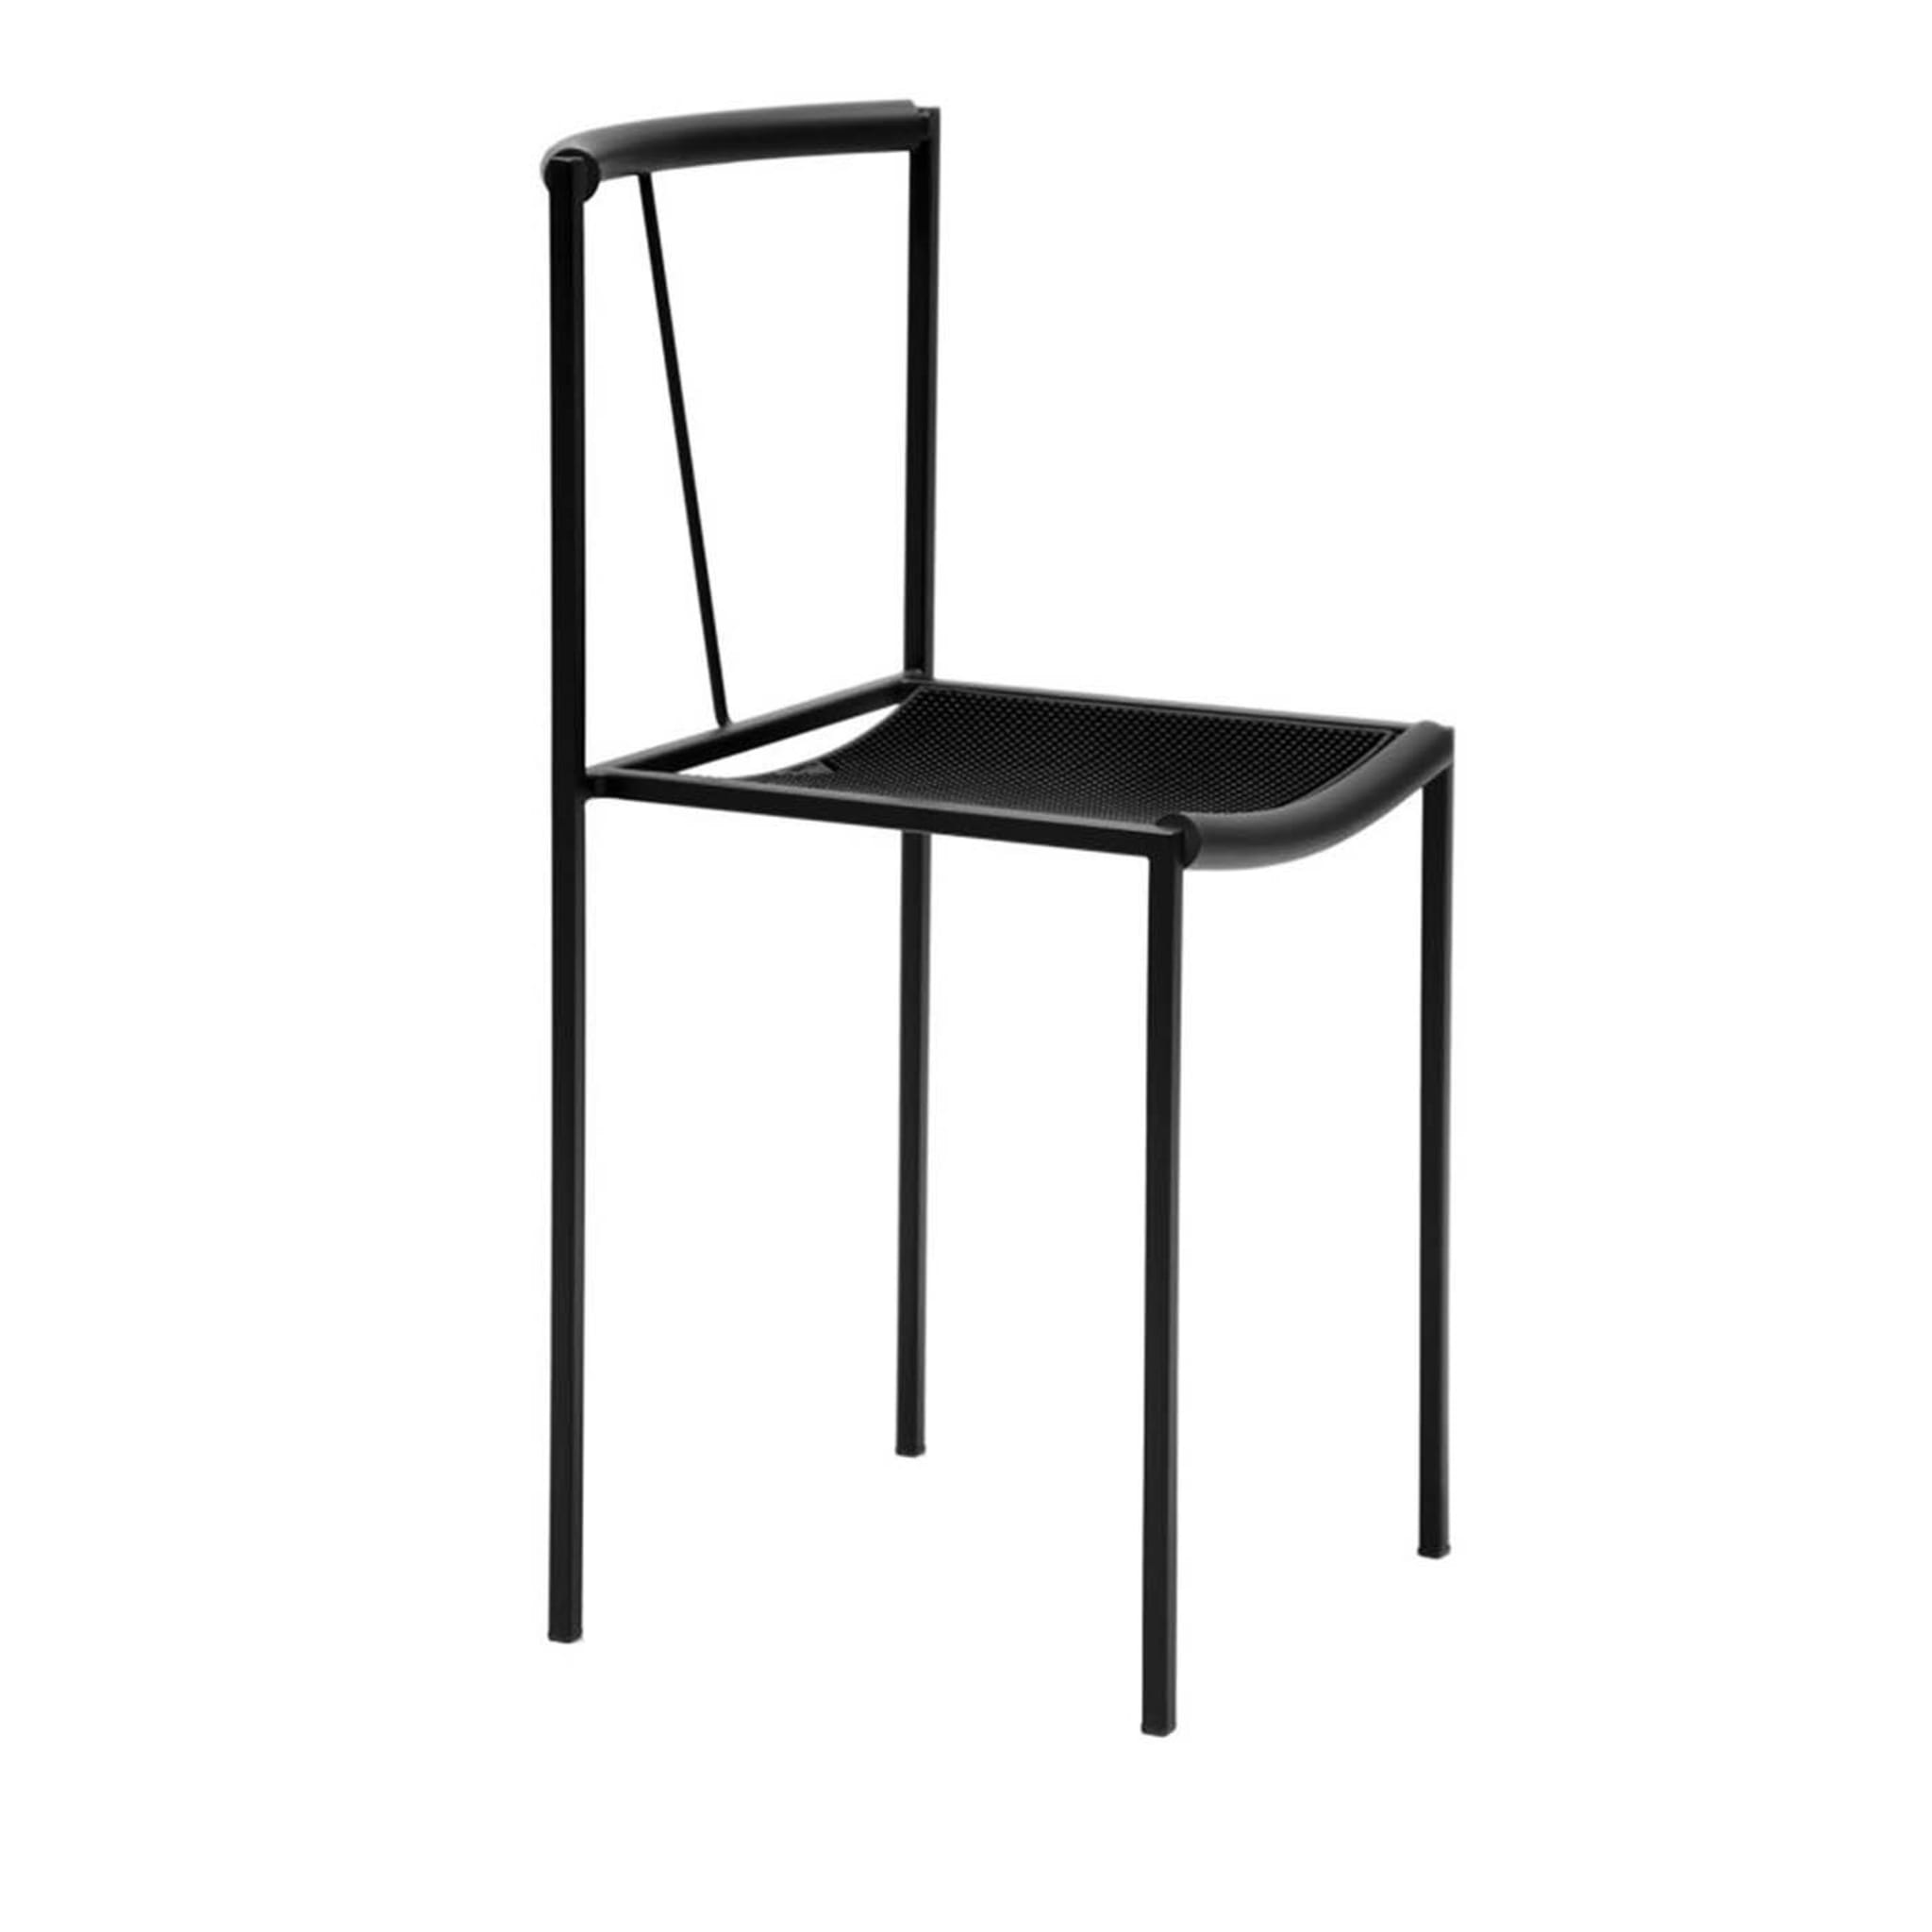 Set of 4 Sedia Chairs by Maurizio Peregalli - Main view